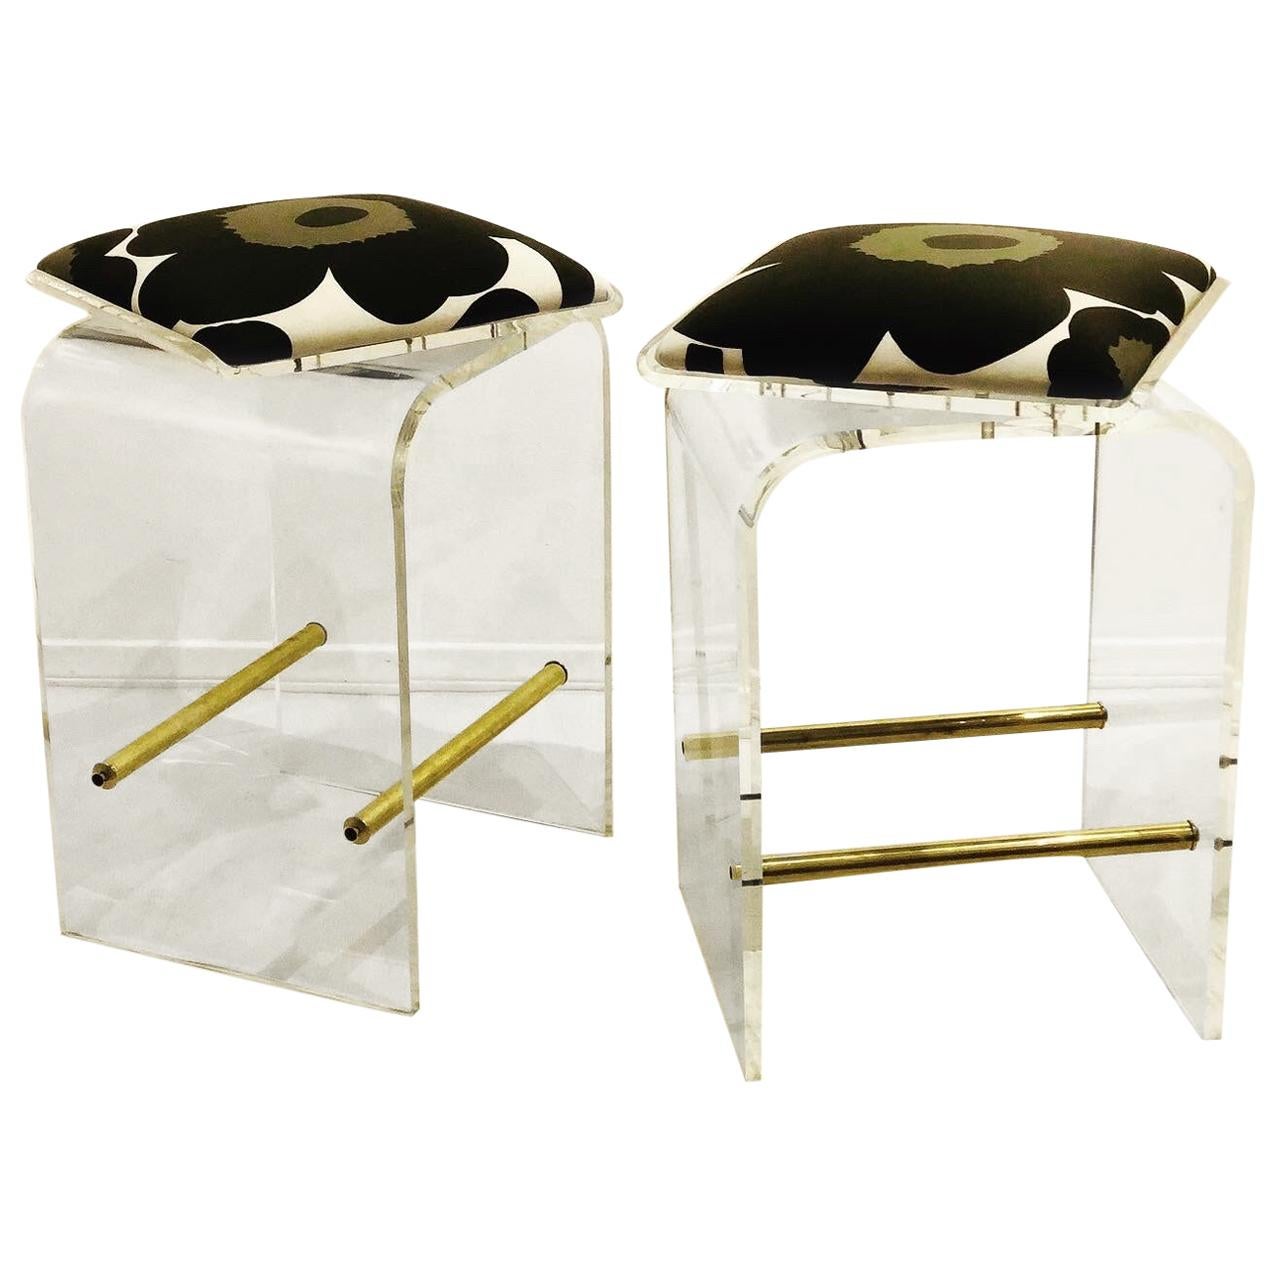 Pair of Charles Hollis Jones Waterfall Bar Stools in Lucite with Swiveling Seats